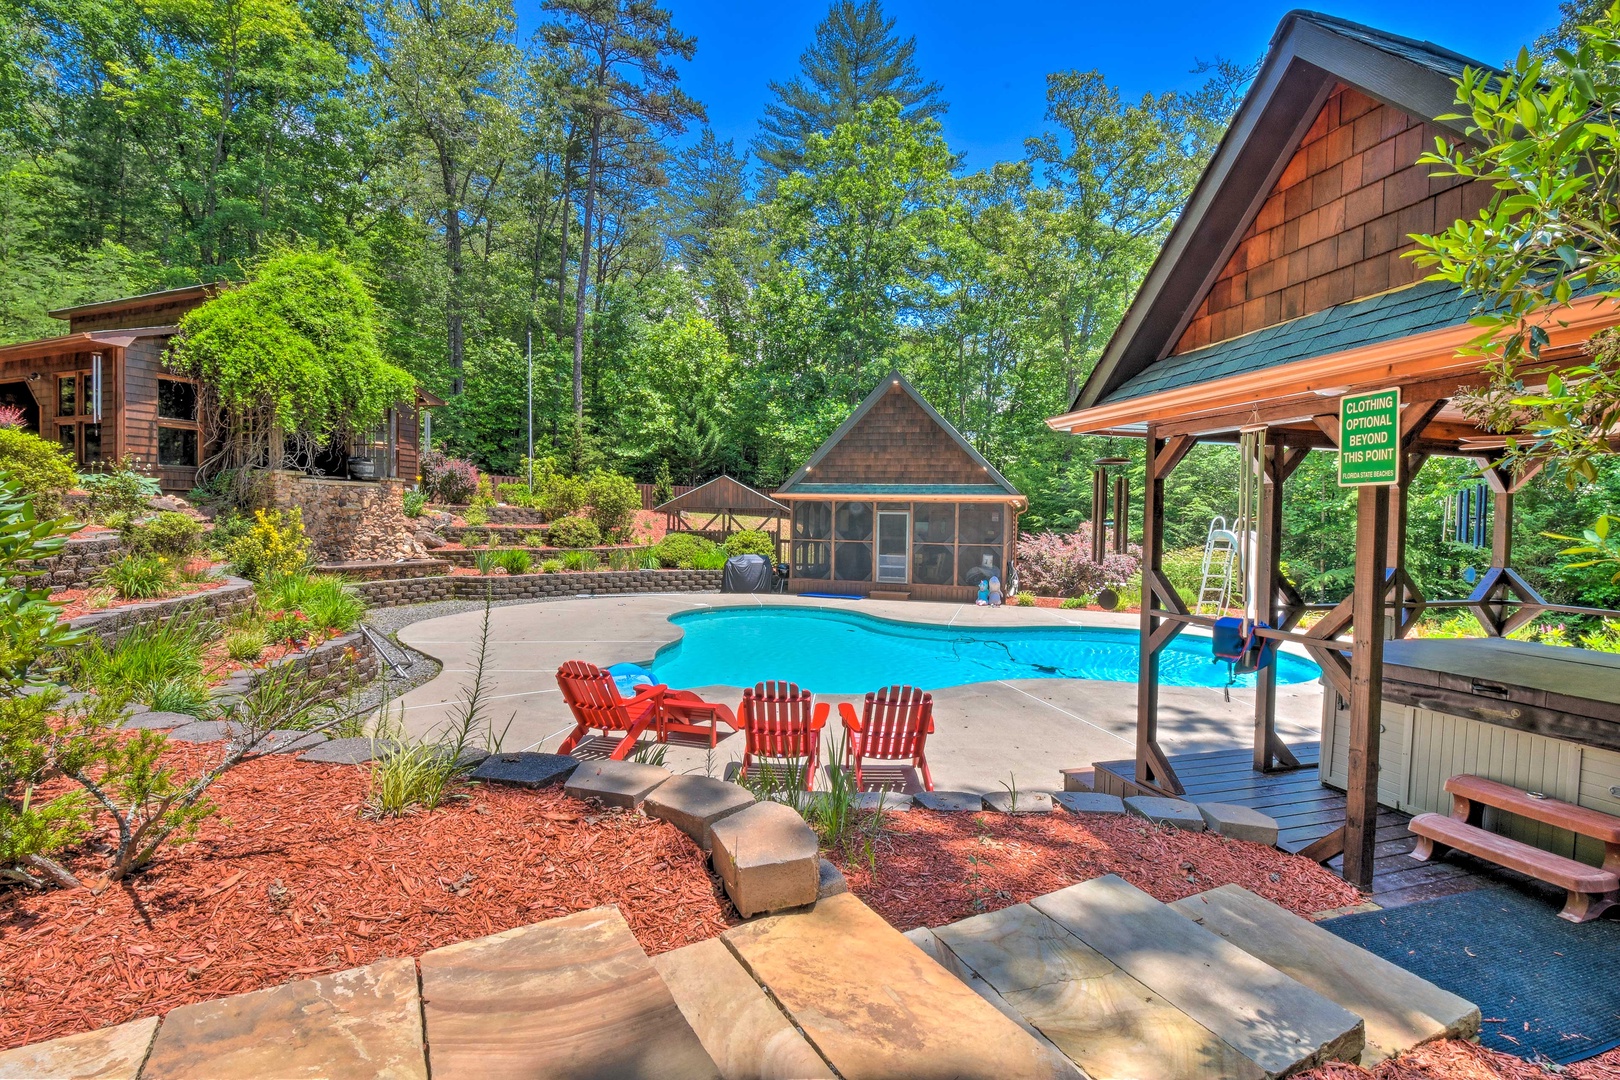 Deer Watch Lodge - Full pool view with cabin view